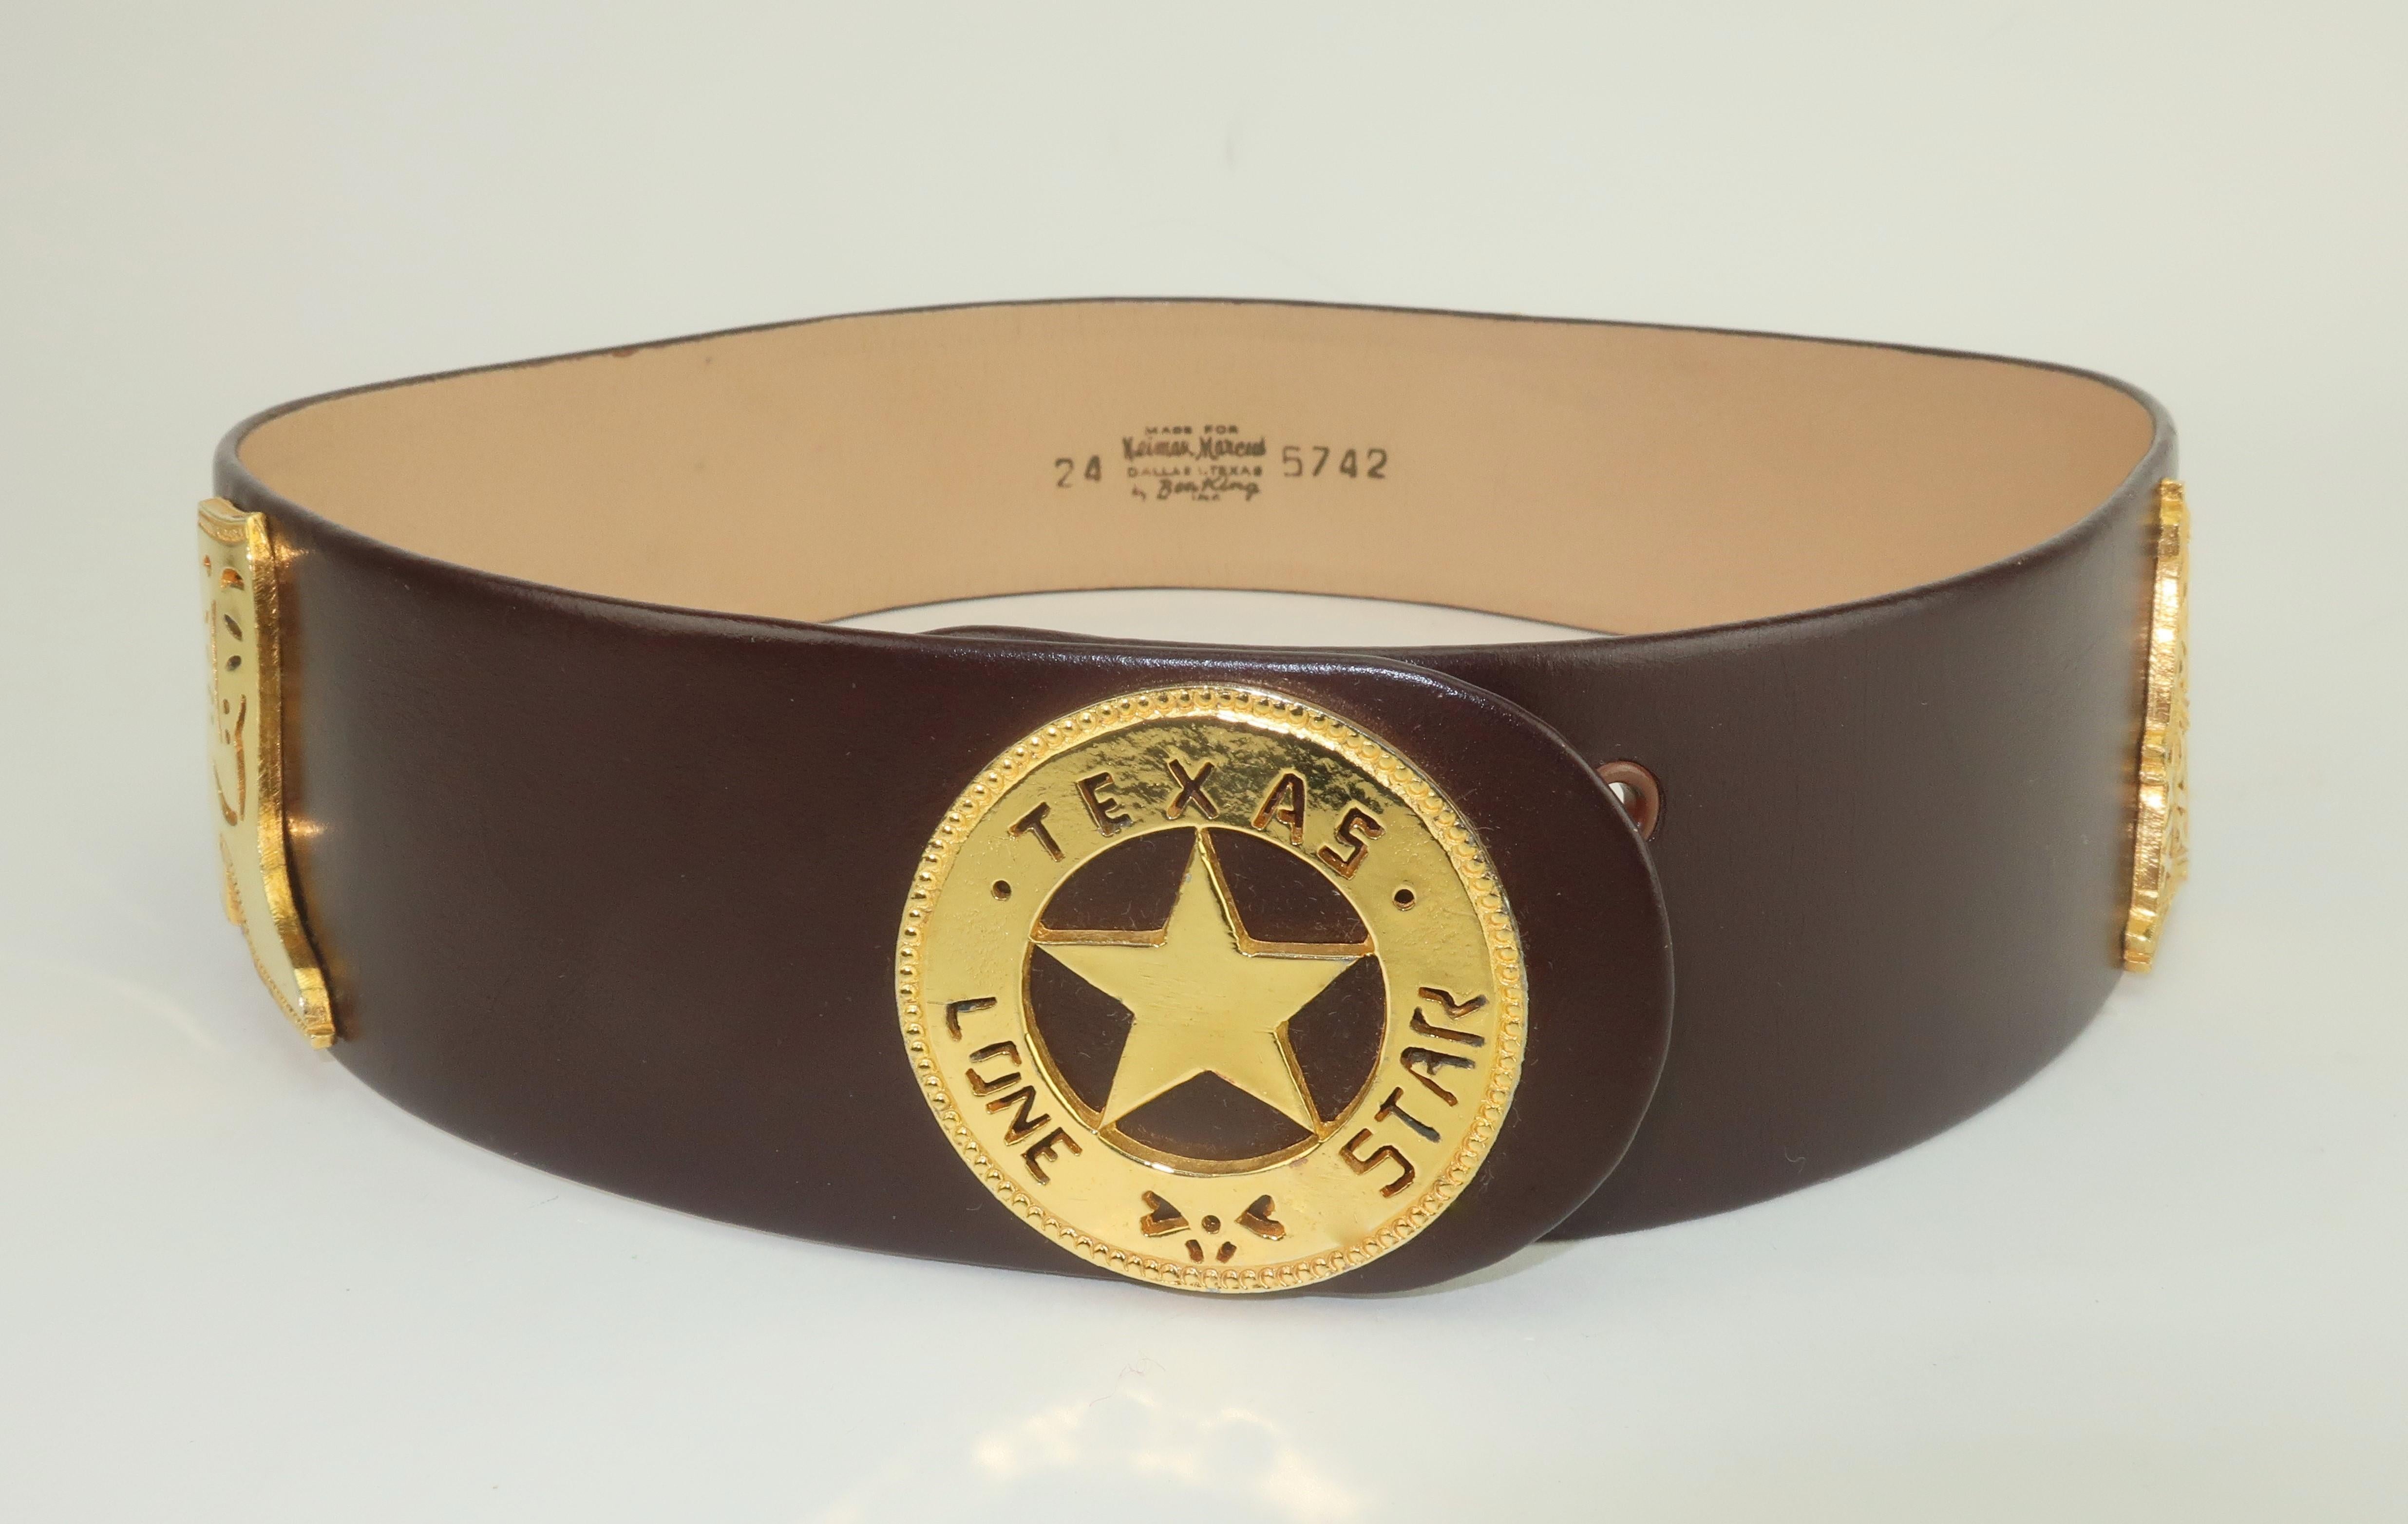 1960's dark brown leather belt by Ben King for Neiman Marcus in Dallas Texas.  The corset style belt has a Lone Star state motif with gold metal charms depicting characteristics of Texas including an oil rig, cowboy boot, saddle and a longhorn.  The